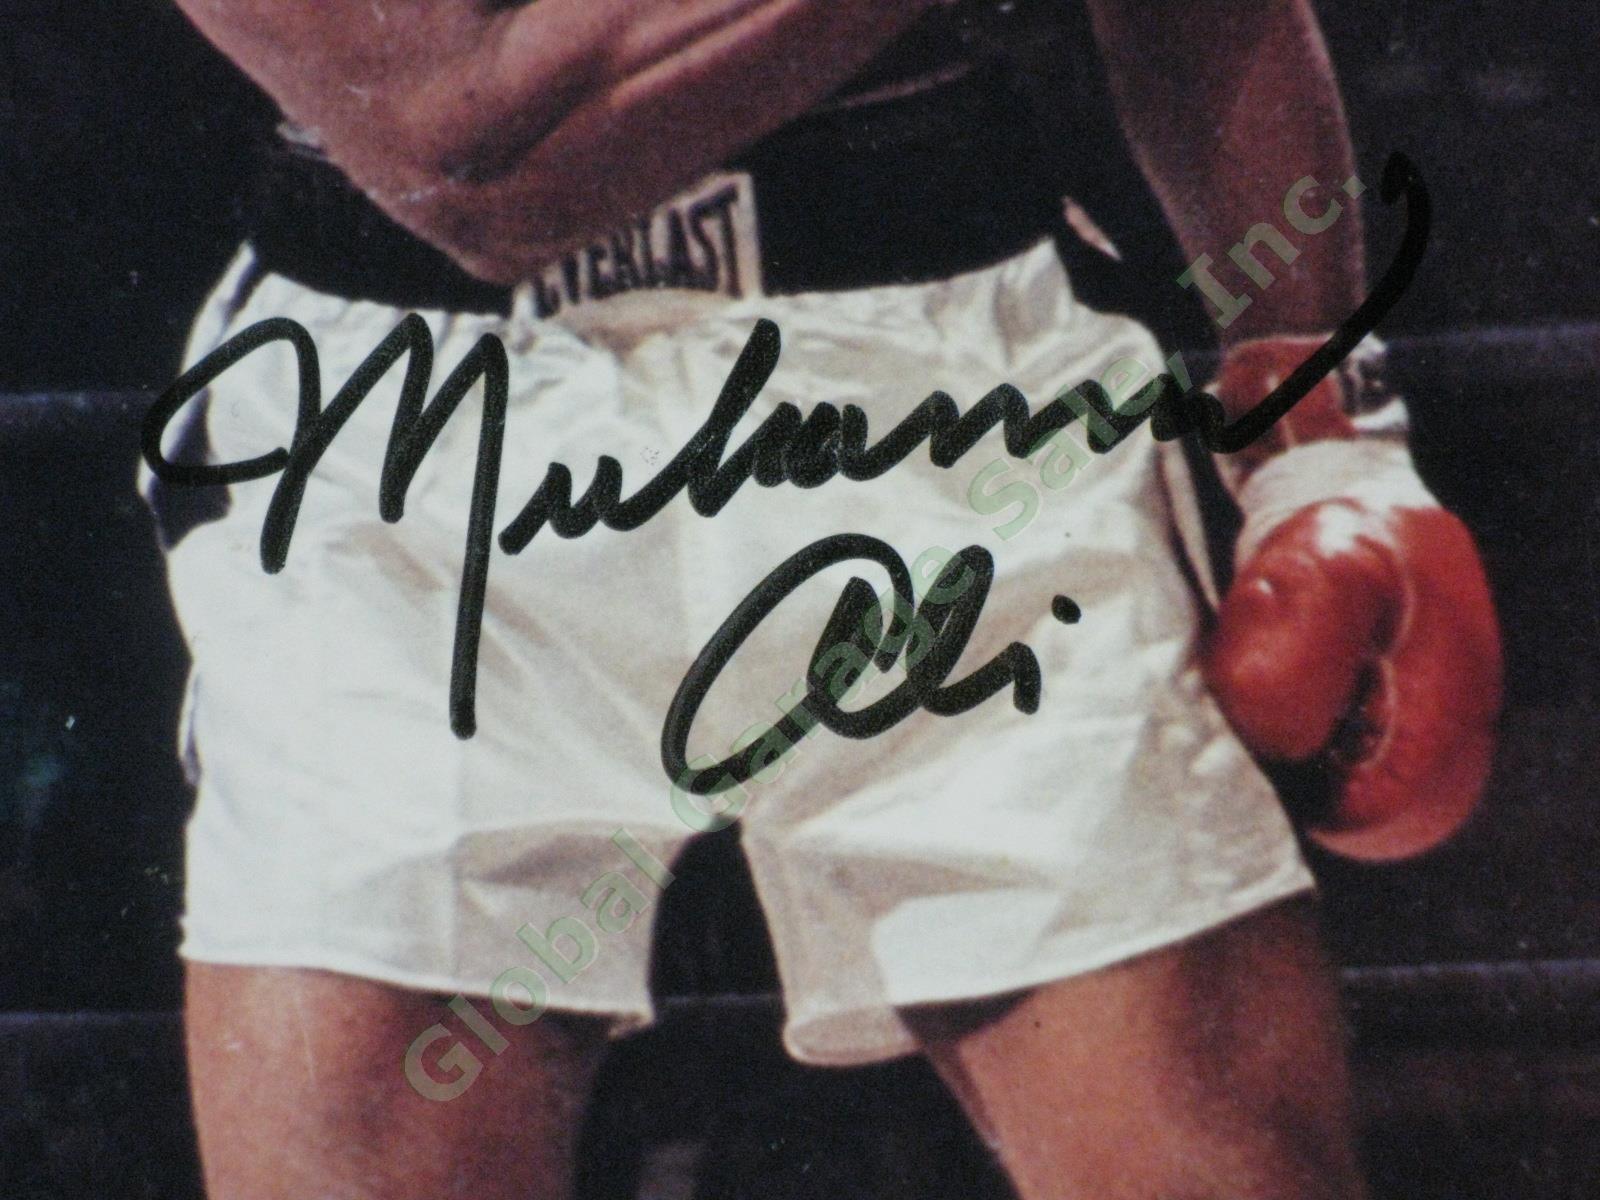 Signed Muhammad Ali Photo Sonny Liston Boxing Knockout Punch Fight May 25 1965 3